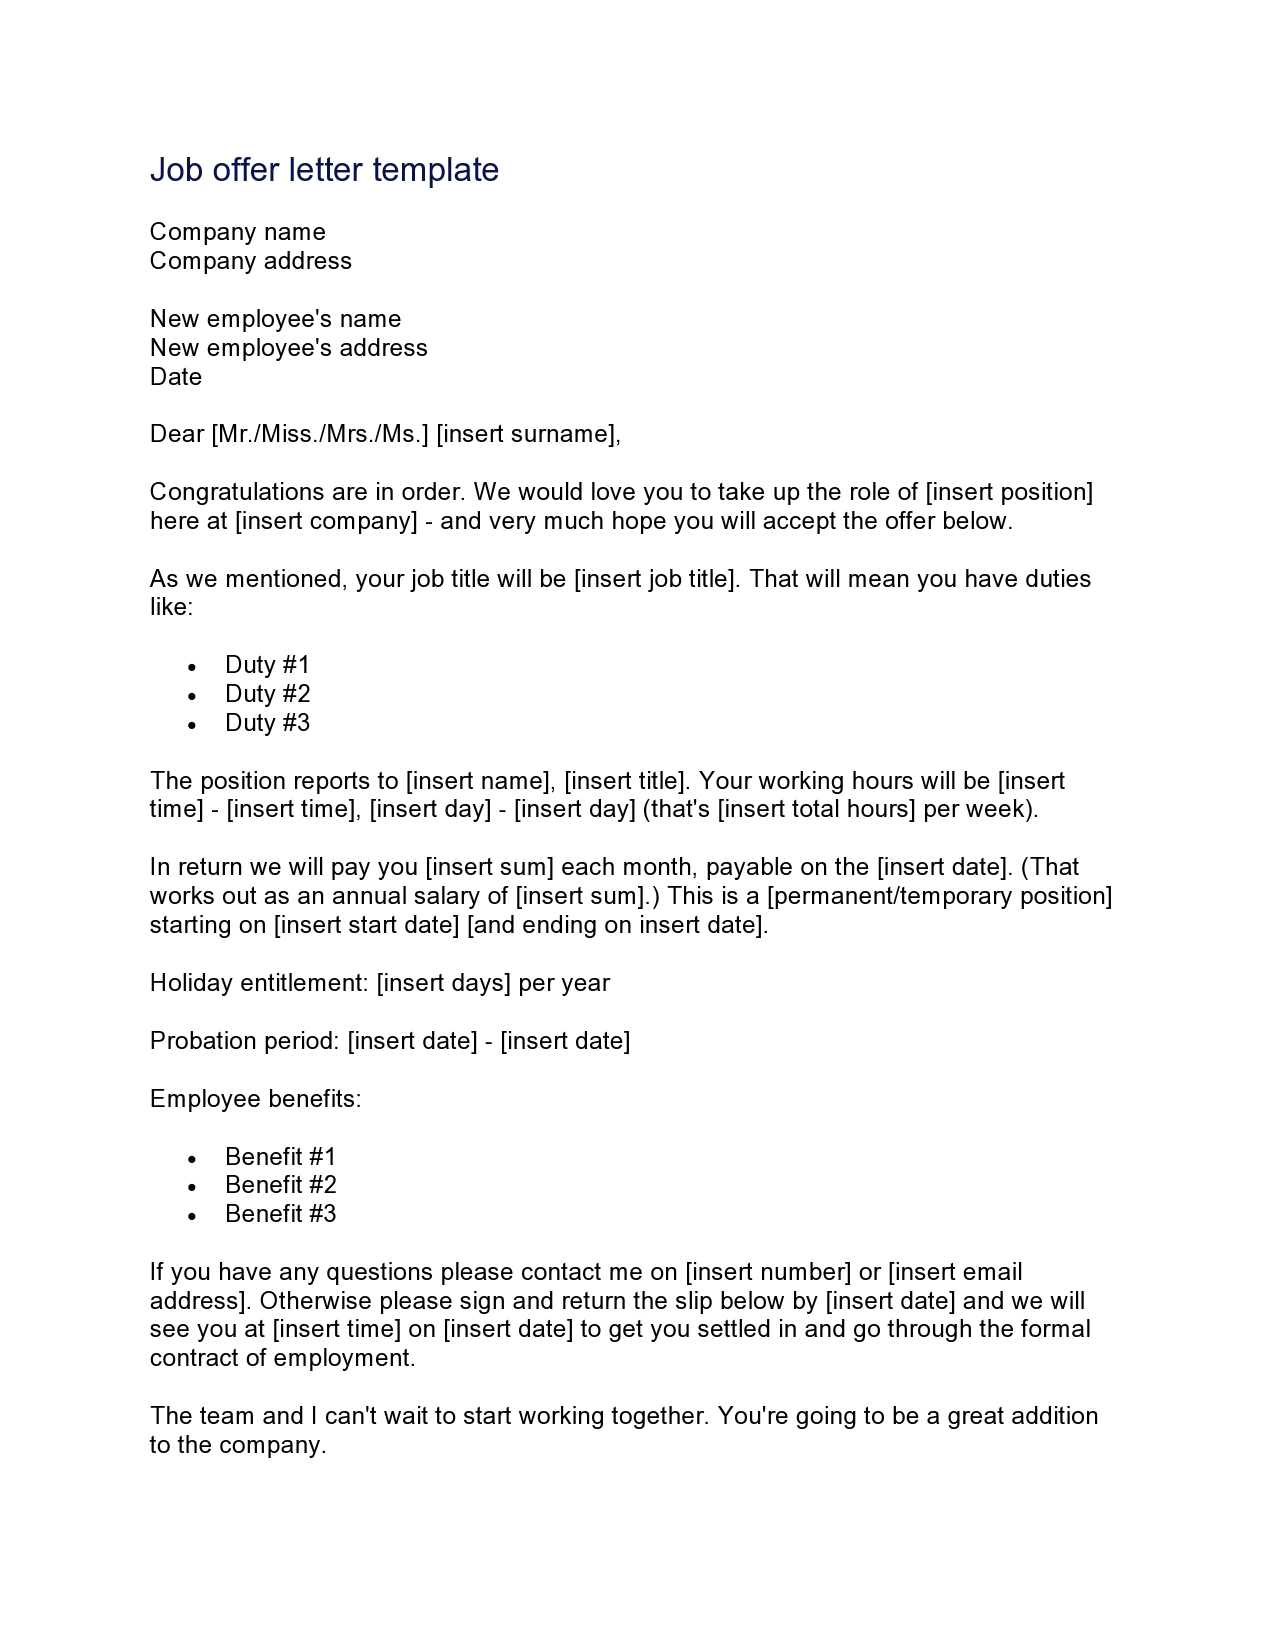 Free employment offer letter template 13